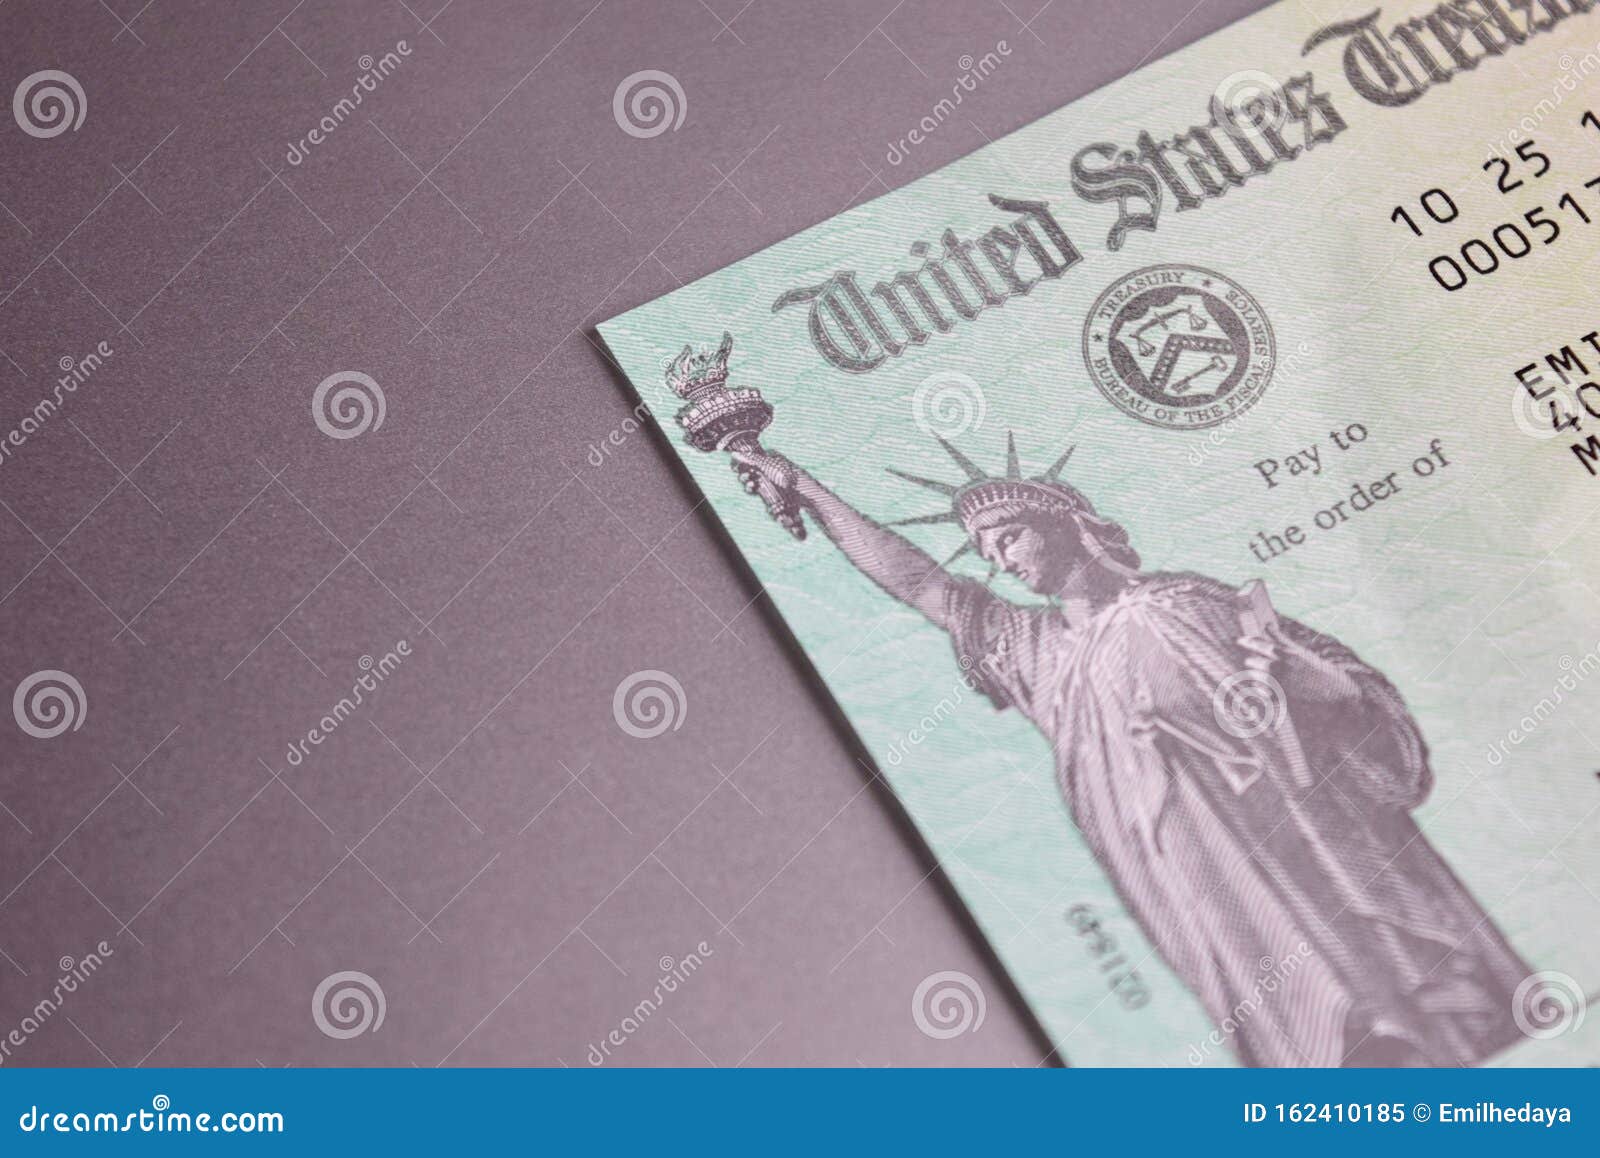 tax refund check from the united states treasury